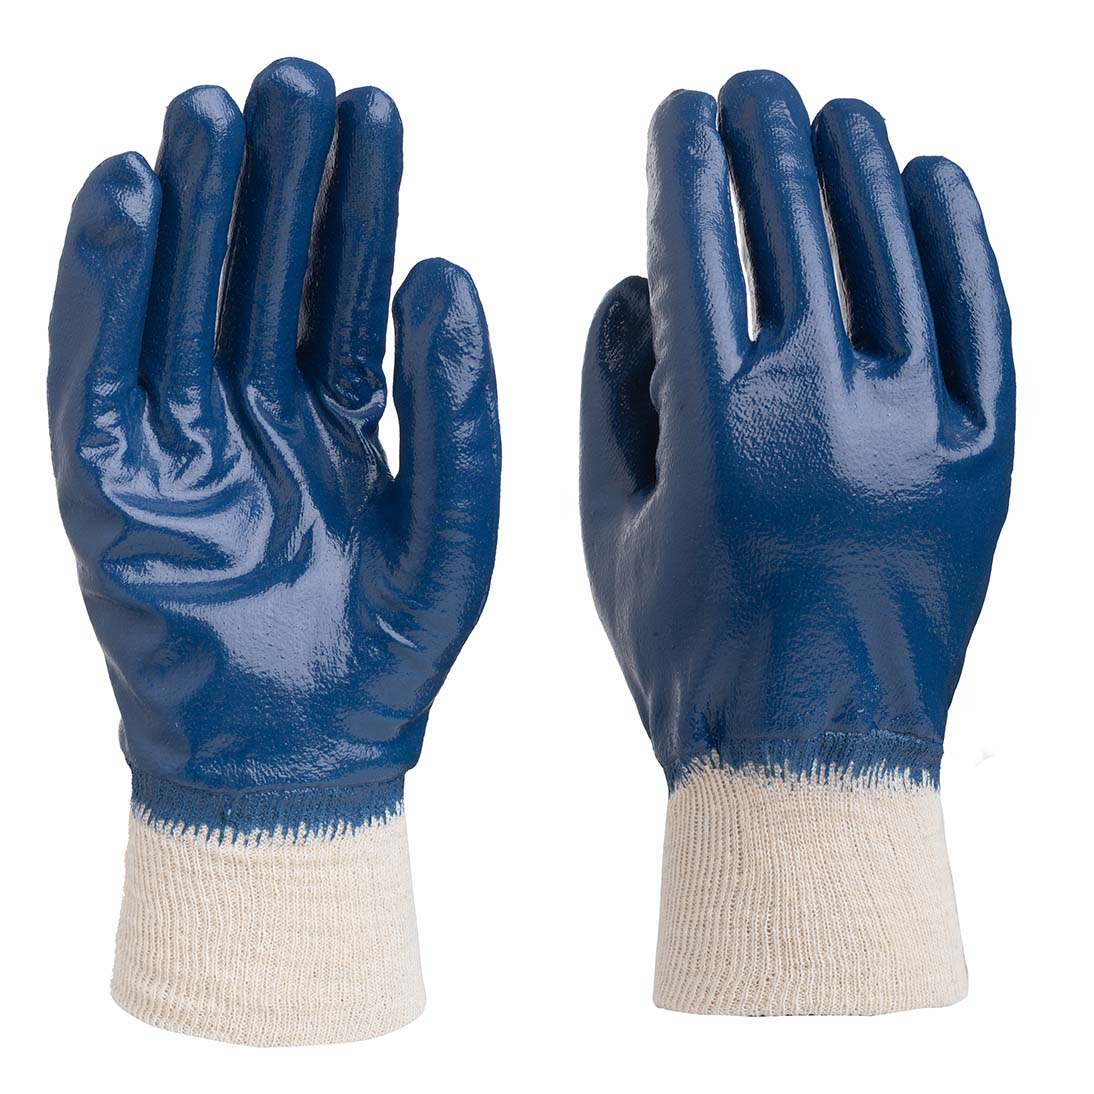 Knit cuff gloves | Heavy nitrile gloves | Fully coated gloves